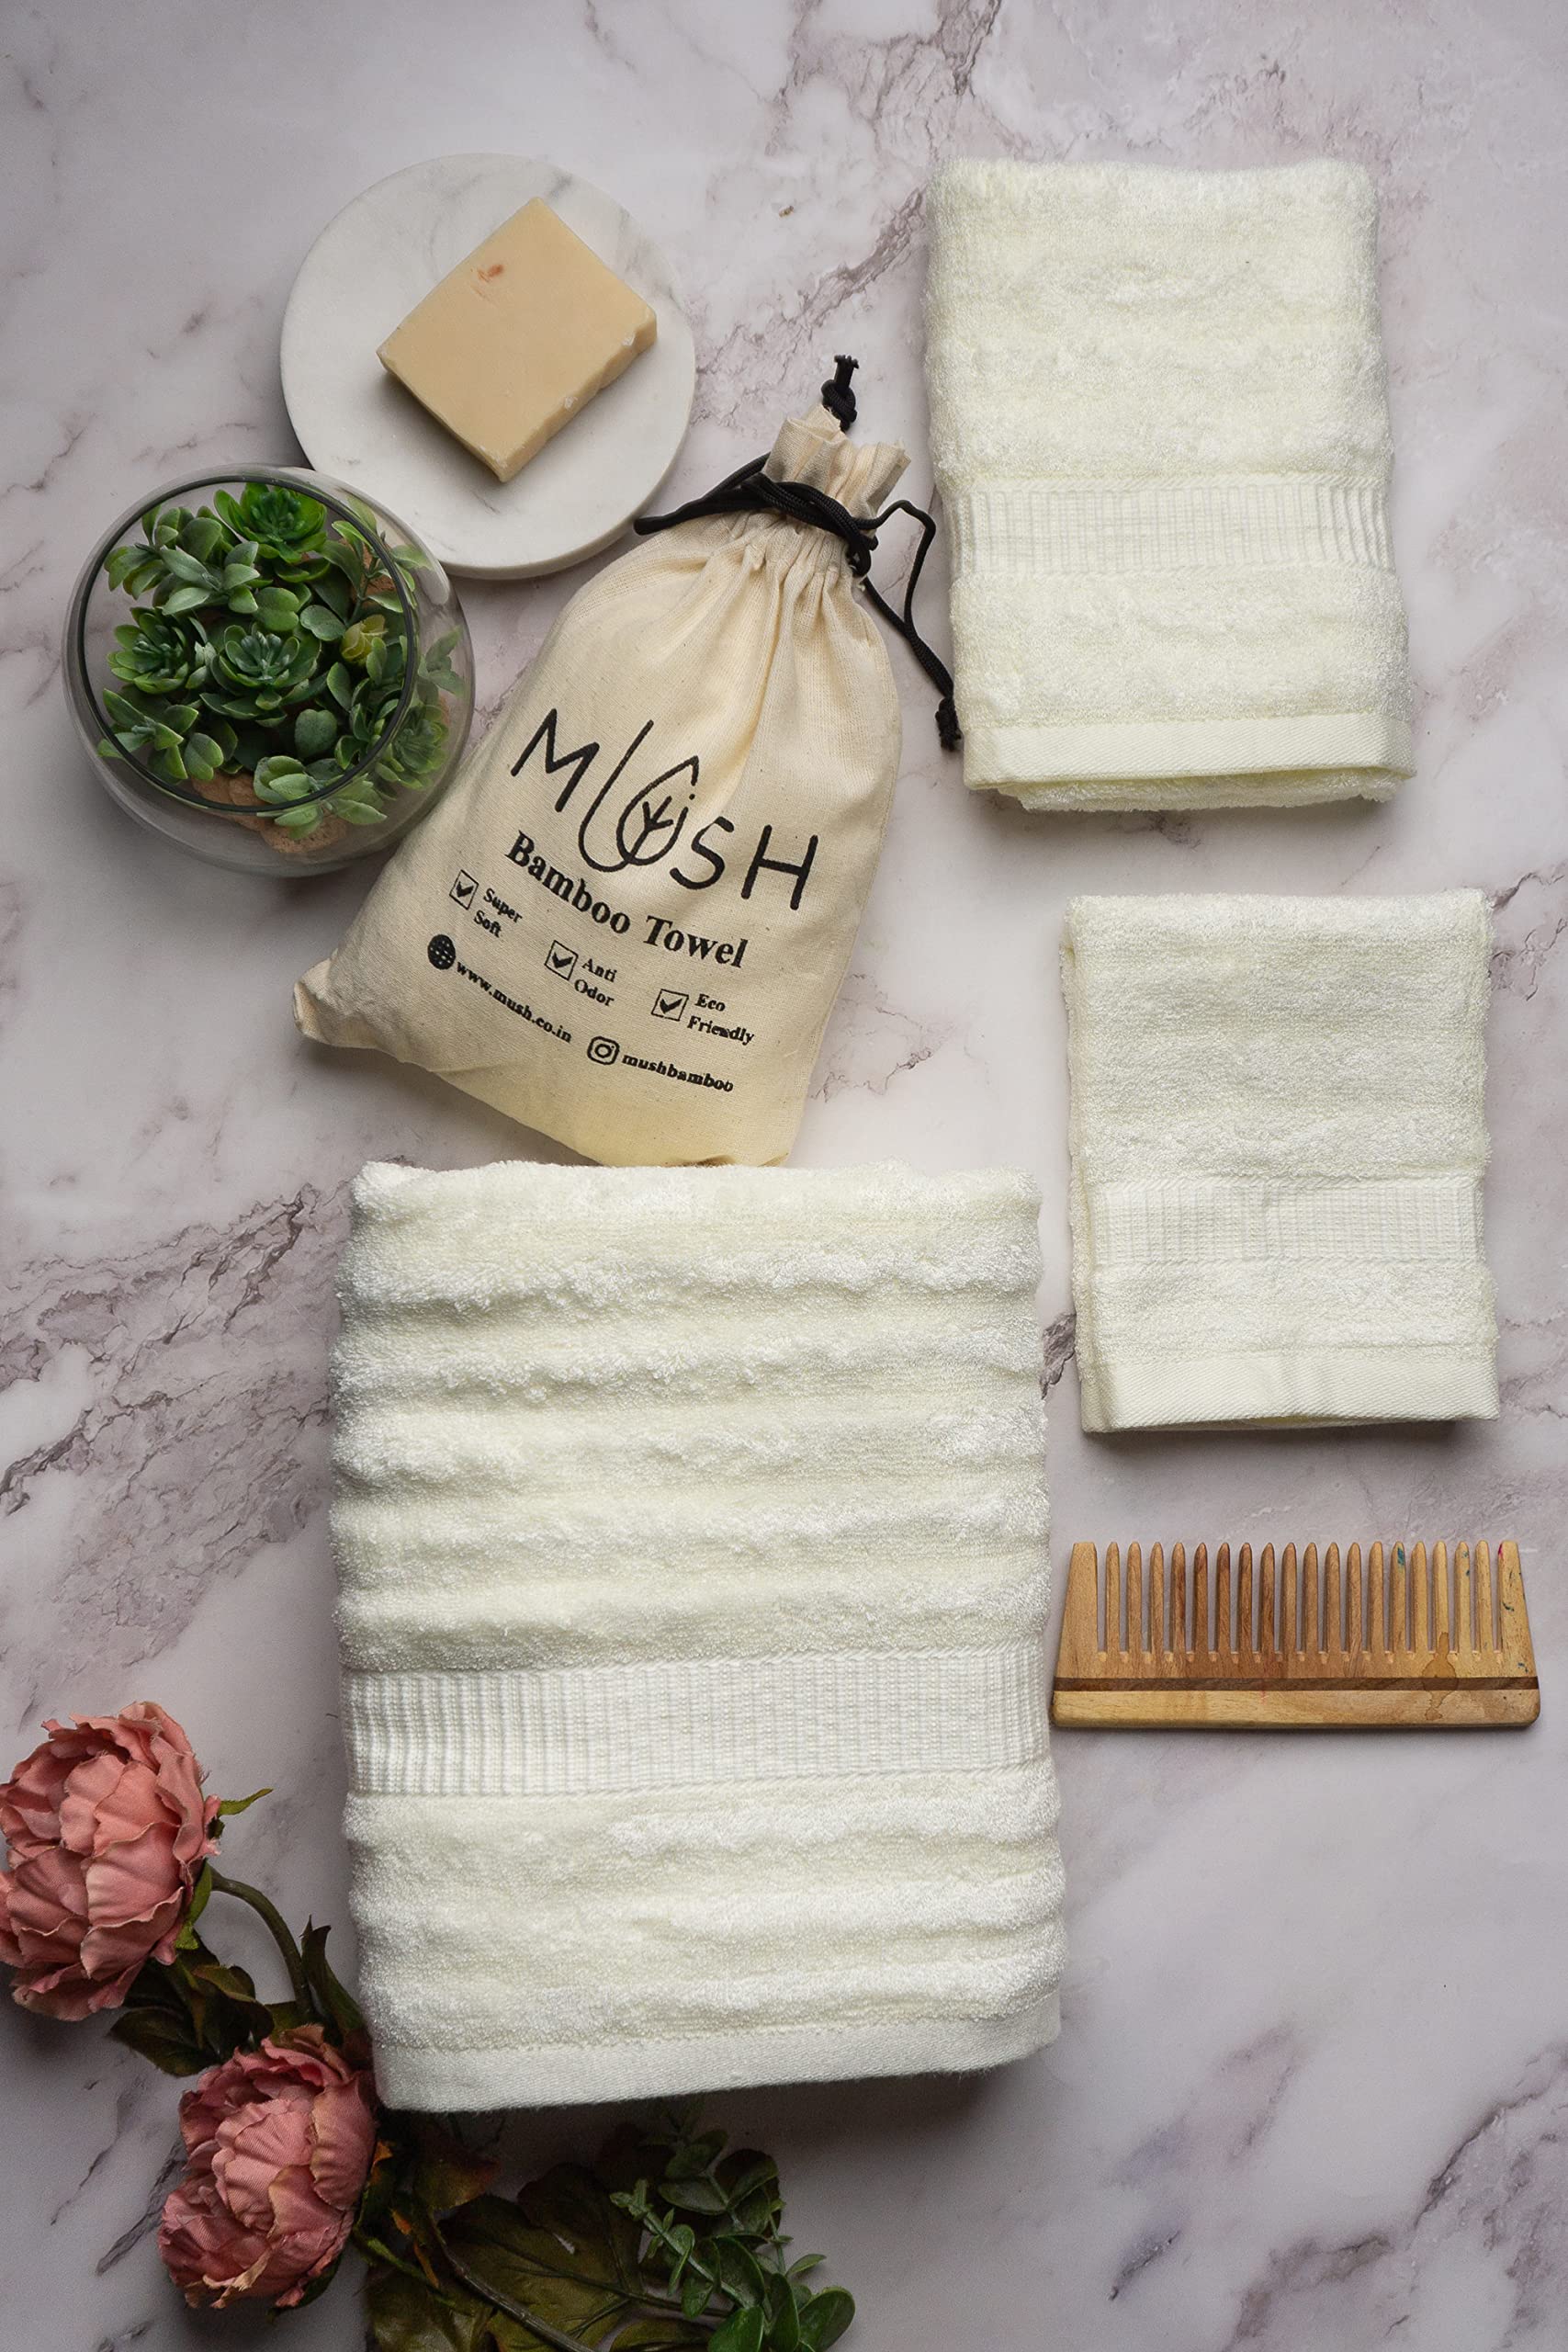 Mush Bamboo Luxurious 3 PieceTowels Set | Ultra Soft, Absorbent and Antimicrobial 600 GSM (Bath Towel, Hand Towel and Face Towel) Perfect for Daily Use and Gifting (Lemon Yellow)